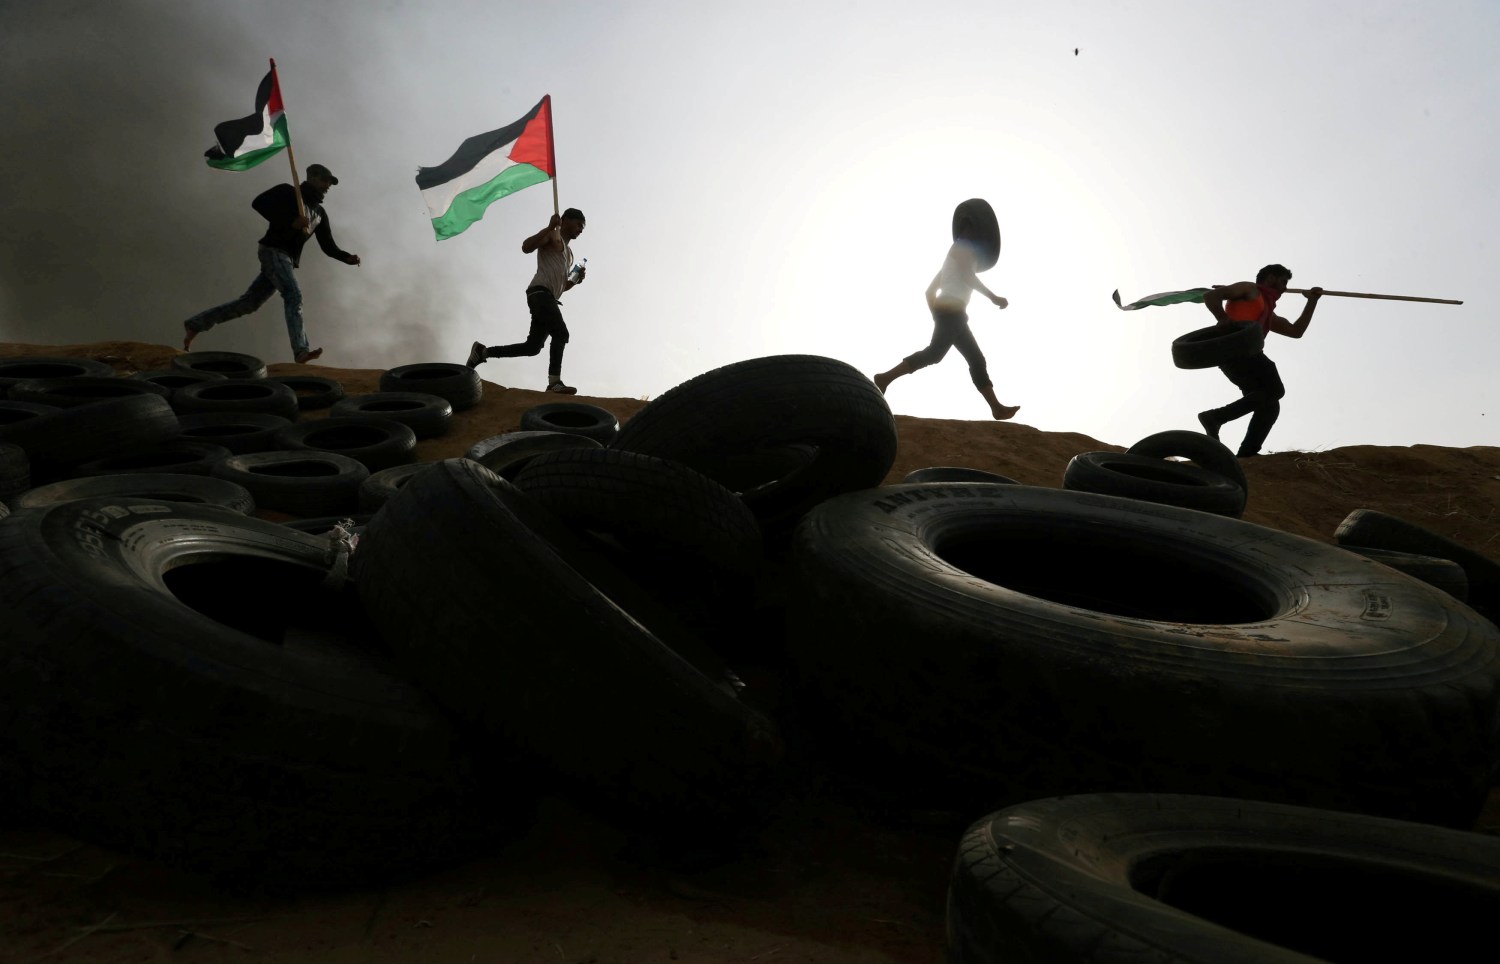 Palestinian protesters run during clashes with Israeli troops at Israel-Gaza border, in the southern Gaza Strip April 5, 2018. REUTERS/Ibraheem Abu Mustafa